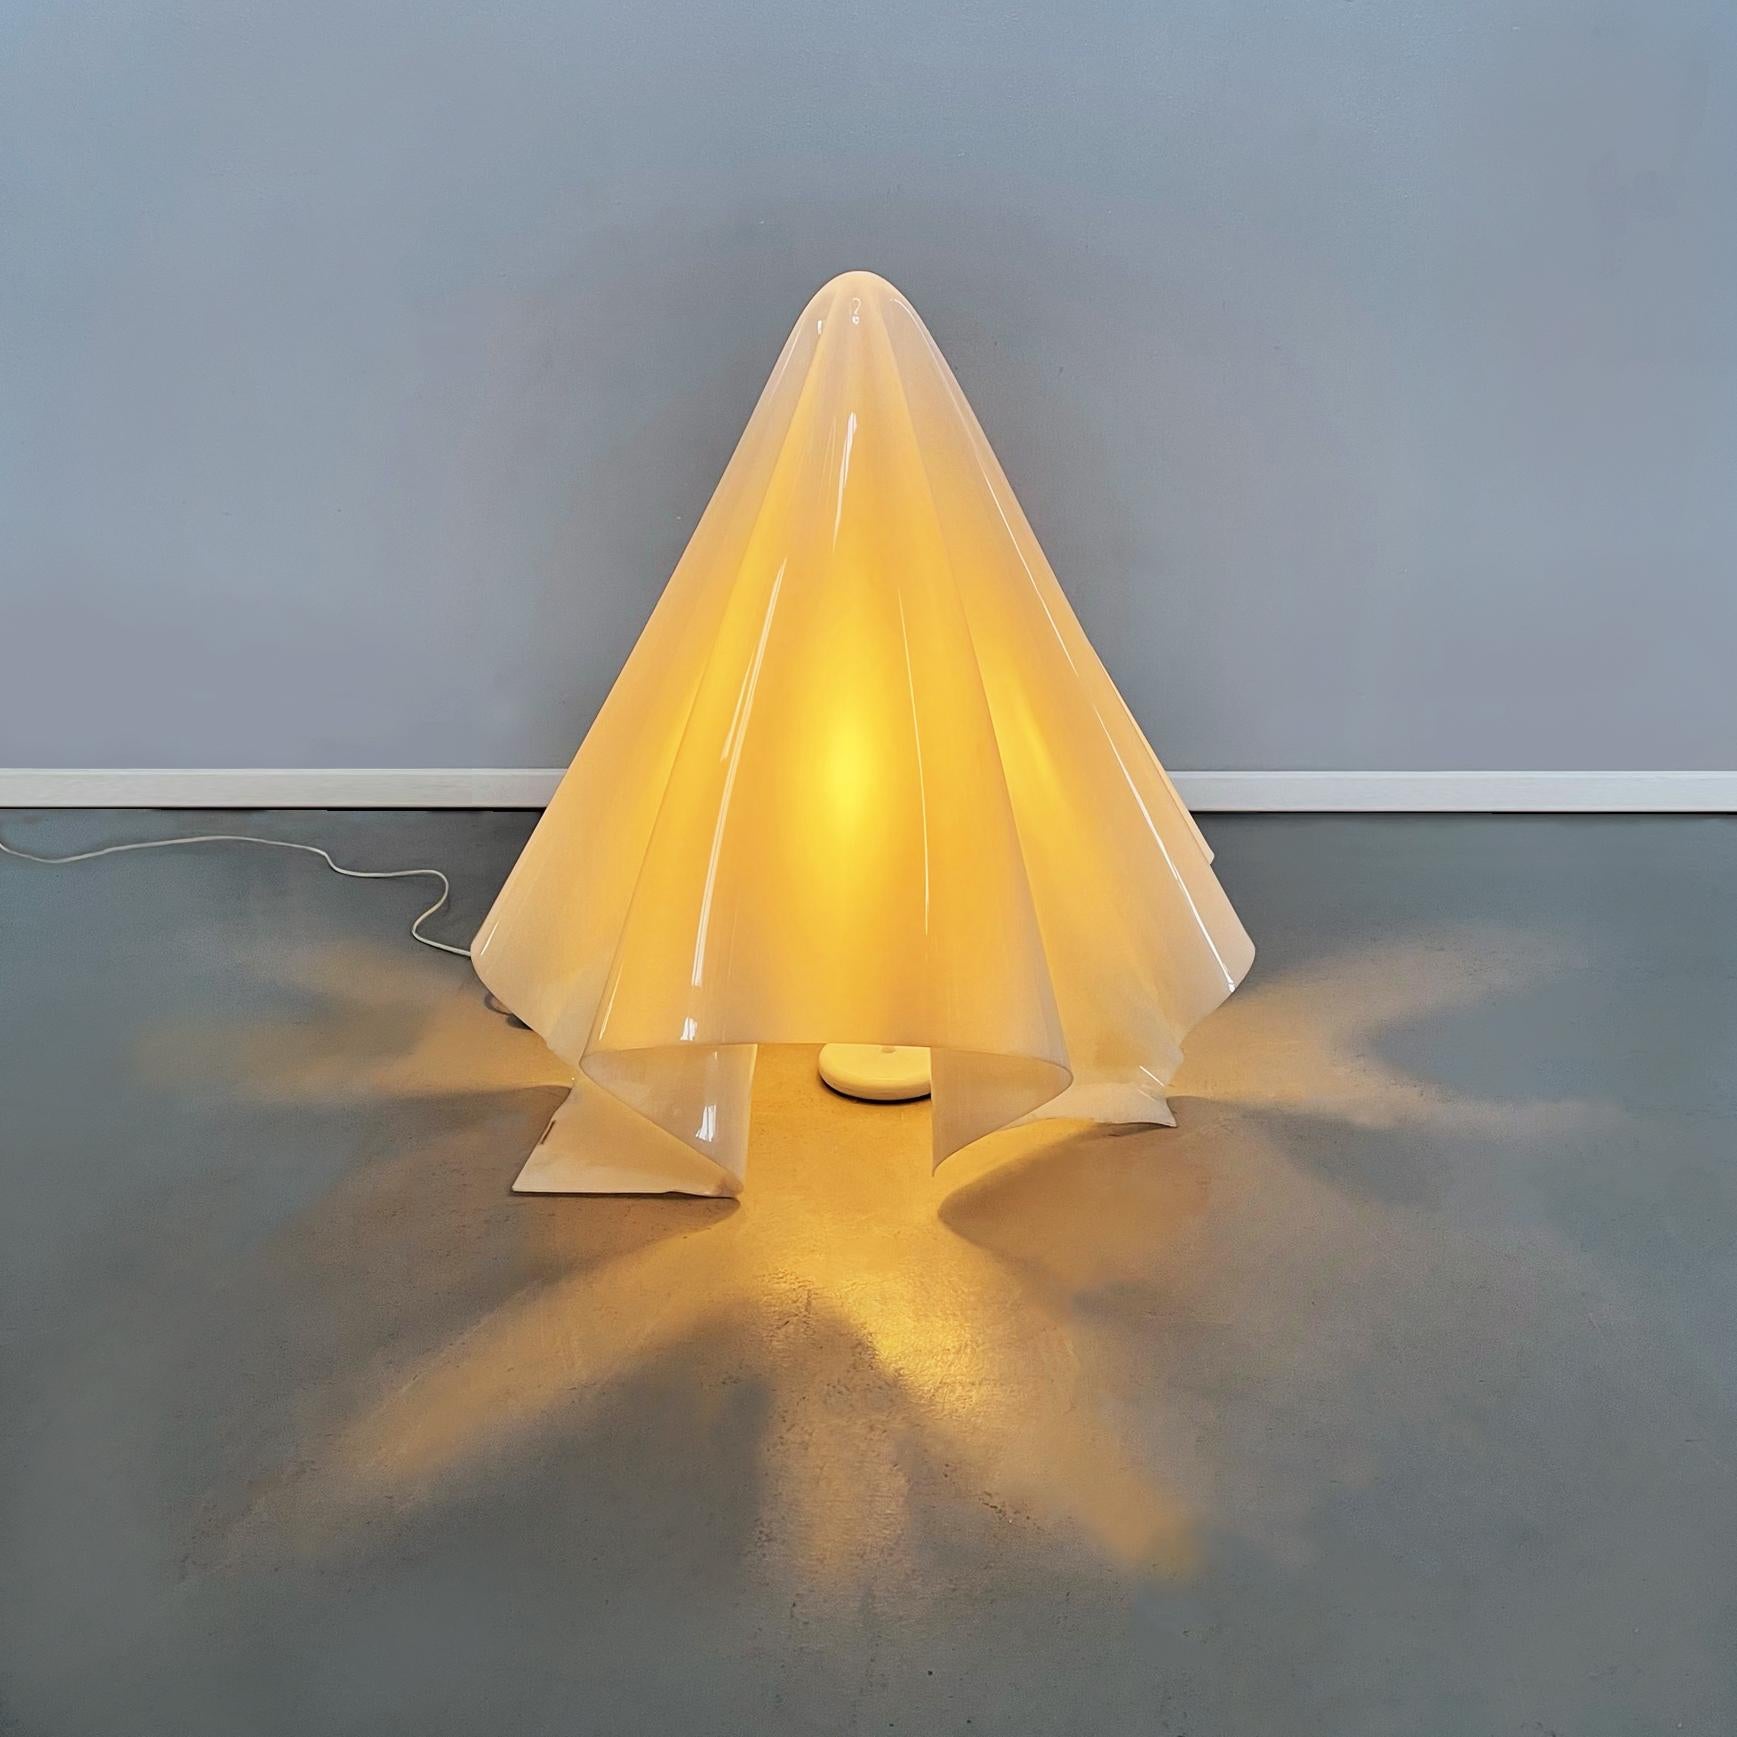 Japan mid-century Floor lamp ghost (Fantasma) by Kuramata for Yamagiwa, 1972.
Floor lamp ghost (Fantasma) in plexiglass. The white acrylic glass shade has the shape of a floating cloth, which rests on the ground. The single leg base is in white